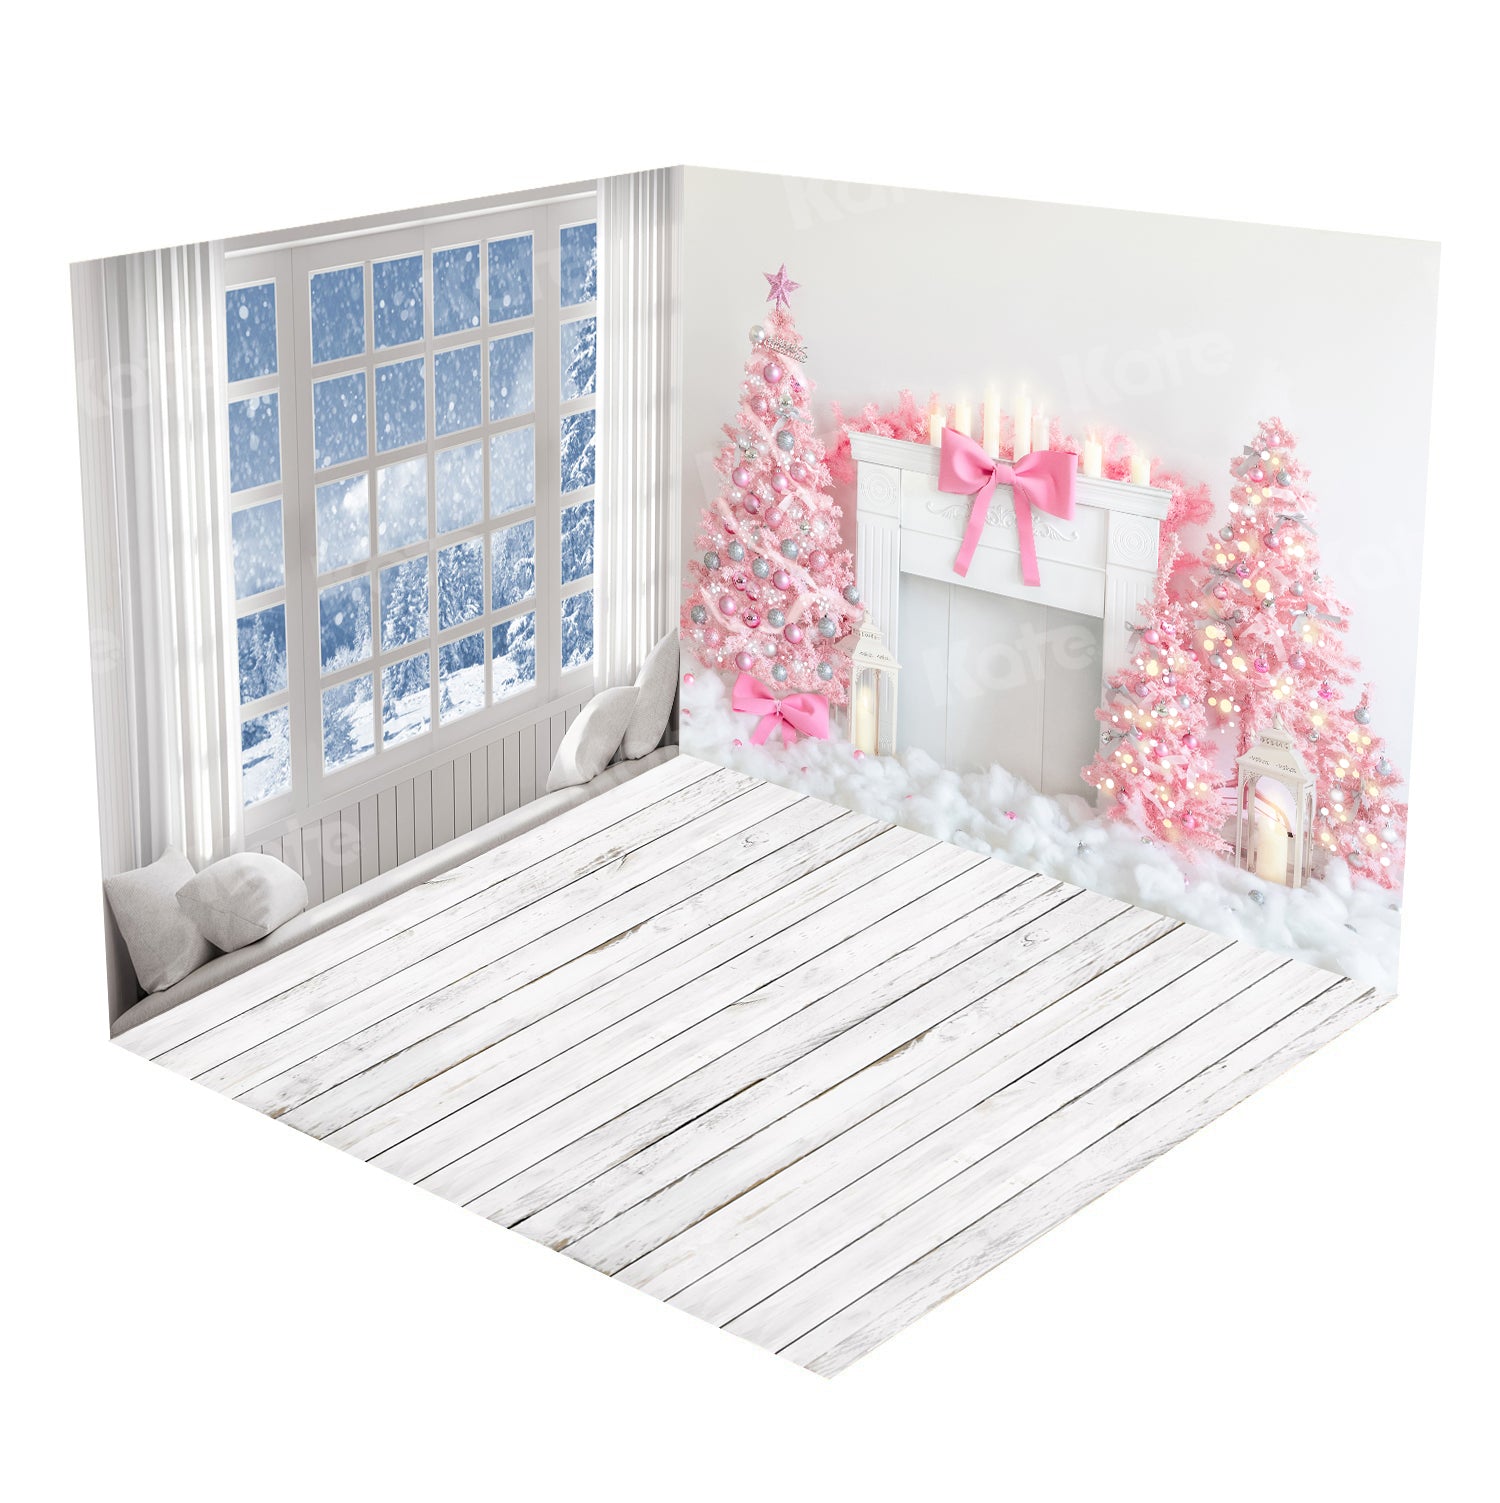 Kate Pink Christmas Tree Snow White Fireplace Window Snowflake Room Set(8ftx8ft&10ftx8ft&8ftx10ft)